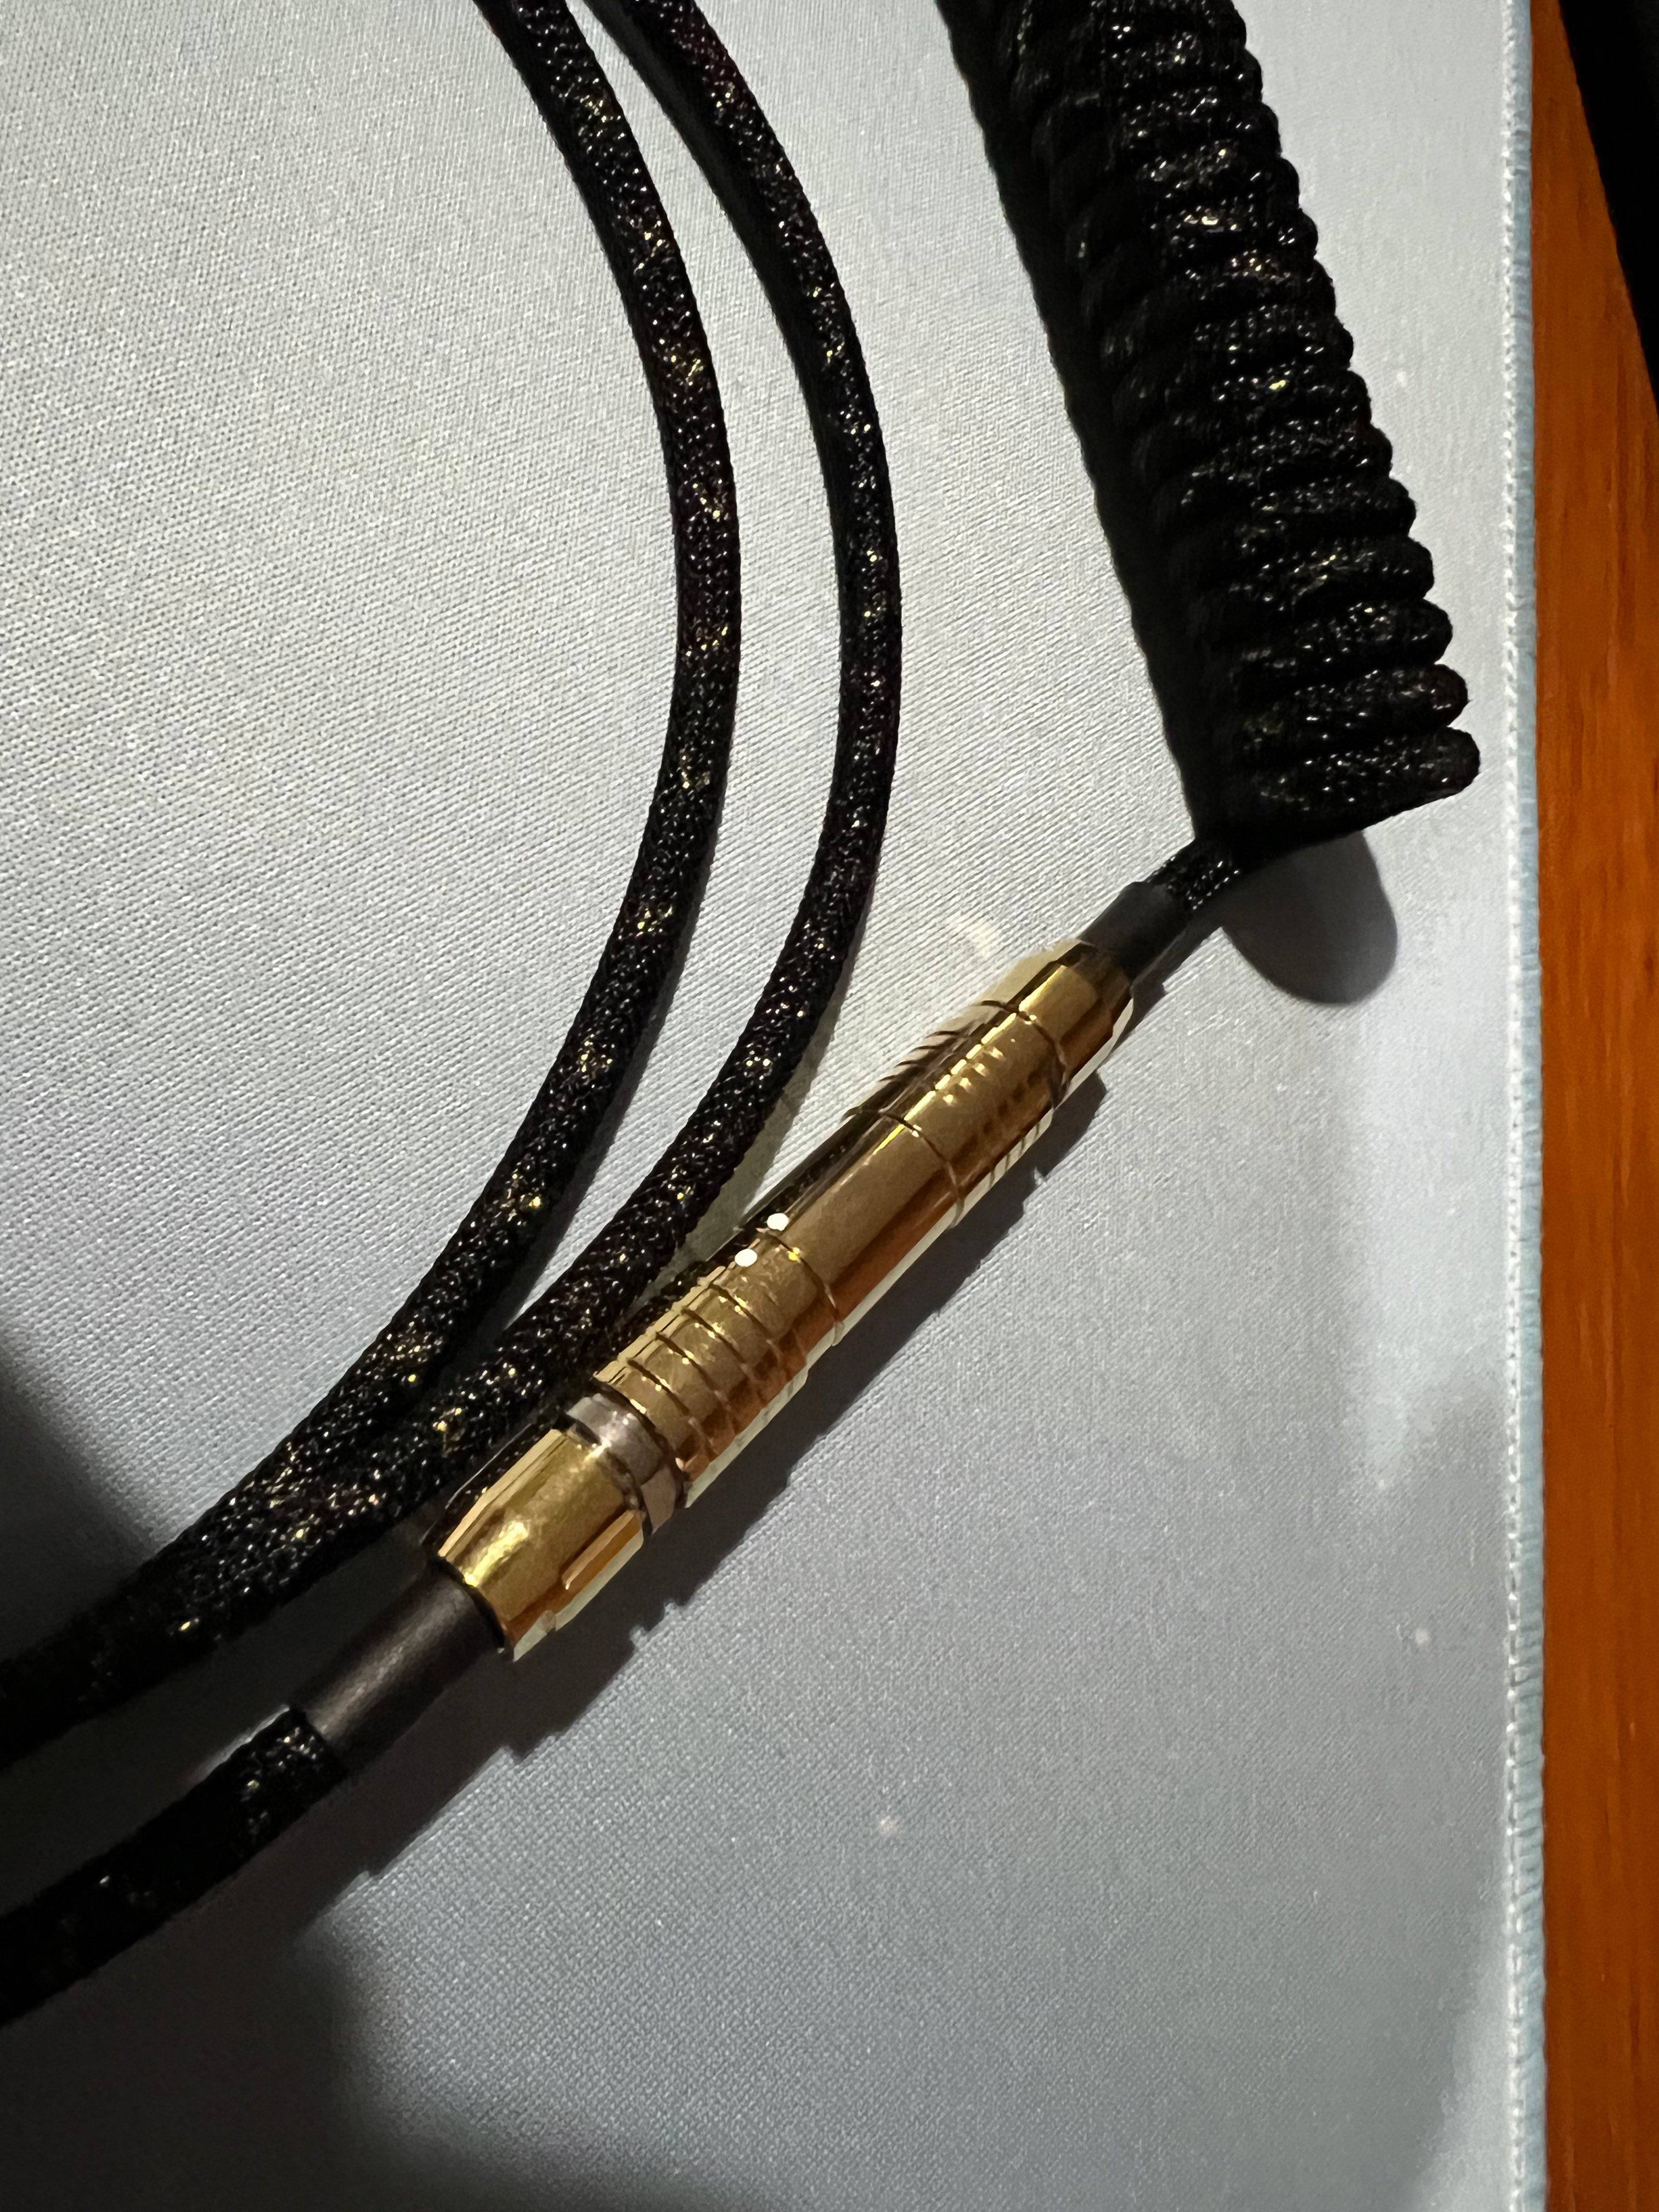 [KFA MARKETPLACE] Mech cables Black & Gold X Premium Push-Pull Cable - KeebsForAll